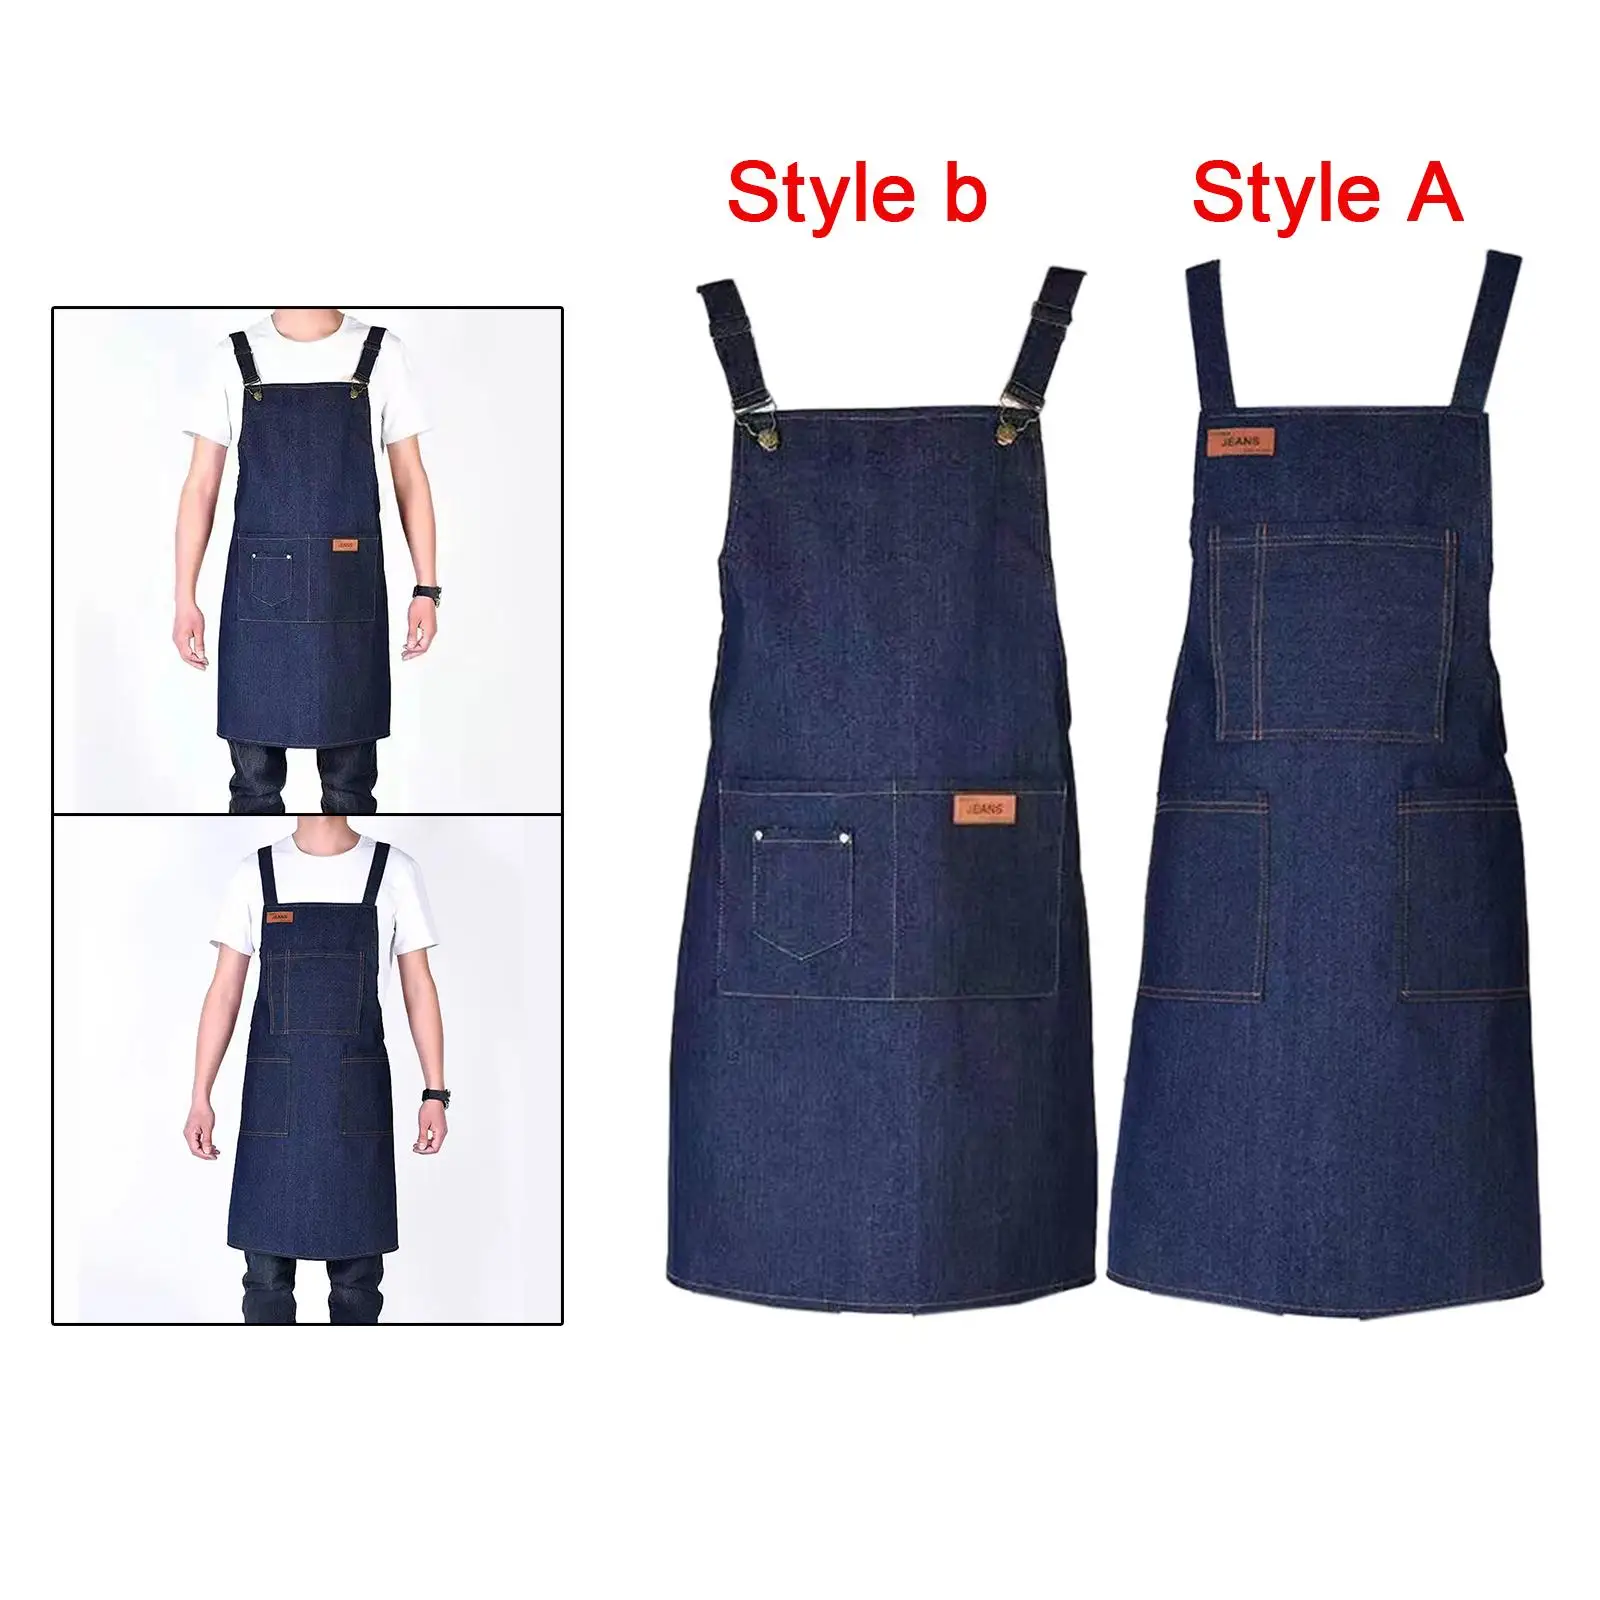 Multi Pockets Denim Apron Simple Christmas Gift for Painting Crafting BBQ